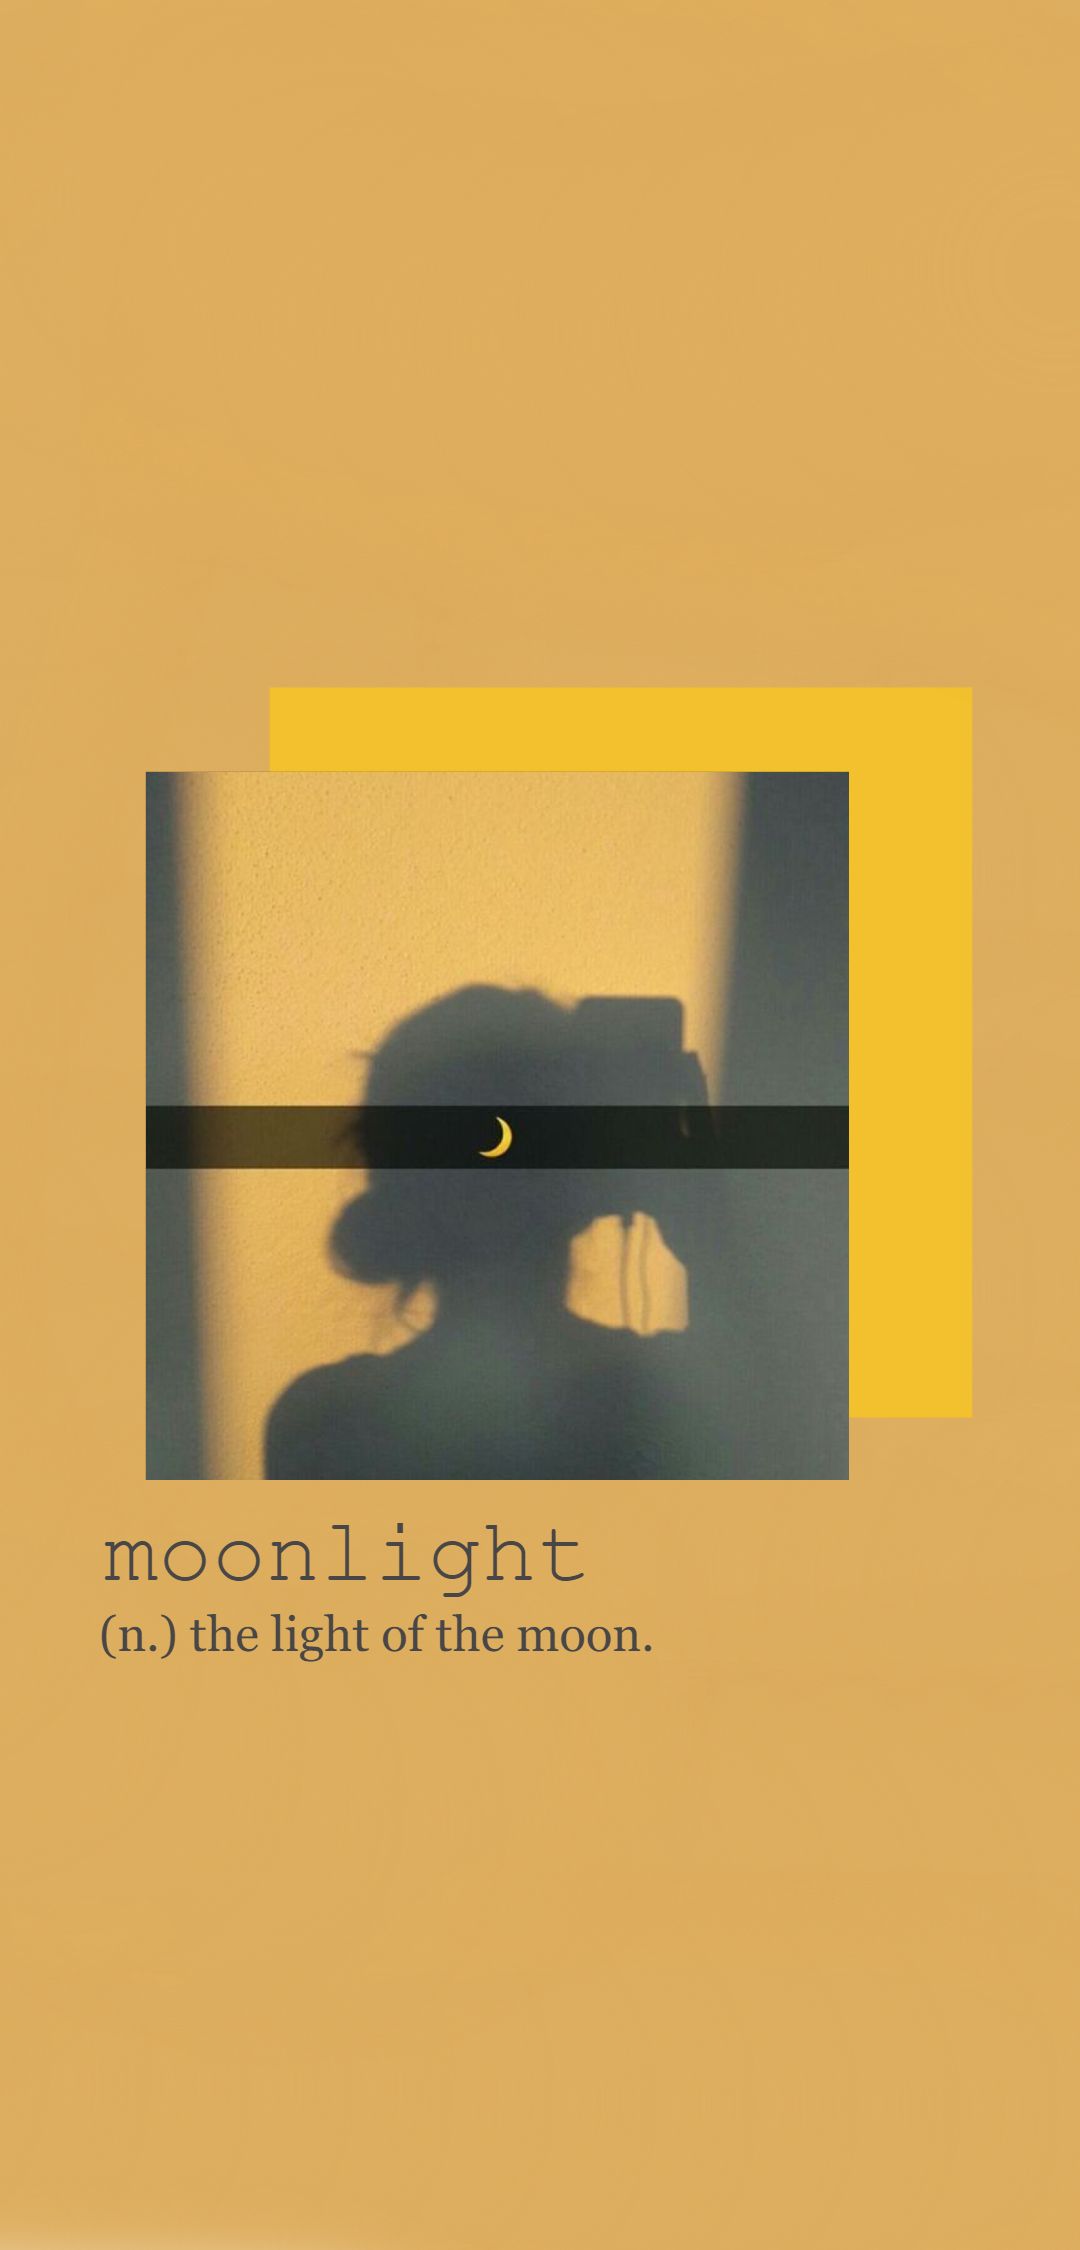 Moonlight definition with a person's shadow on a wall - Light yellow